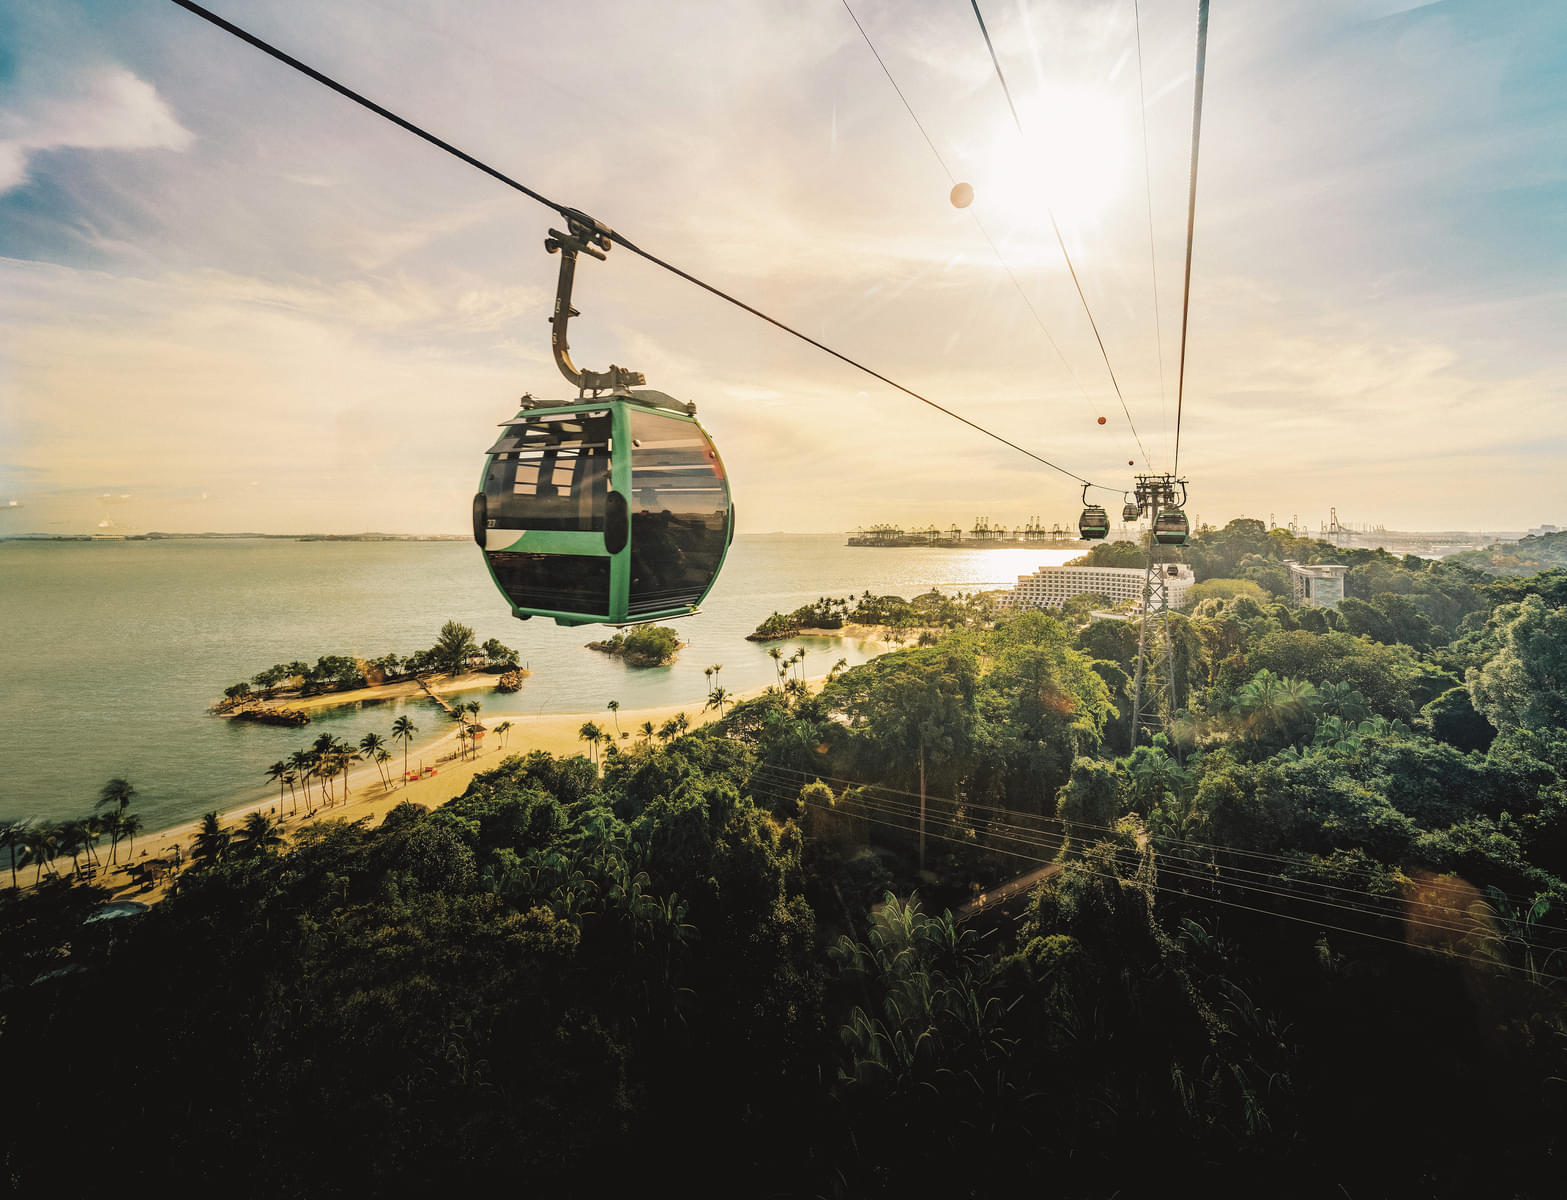 Embark on an exhilarating high-altitude cable car adventure